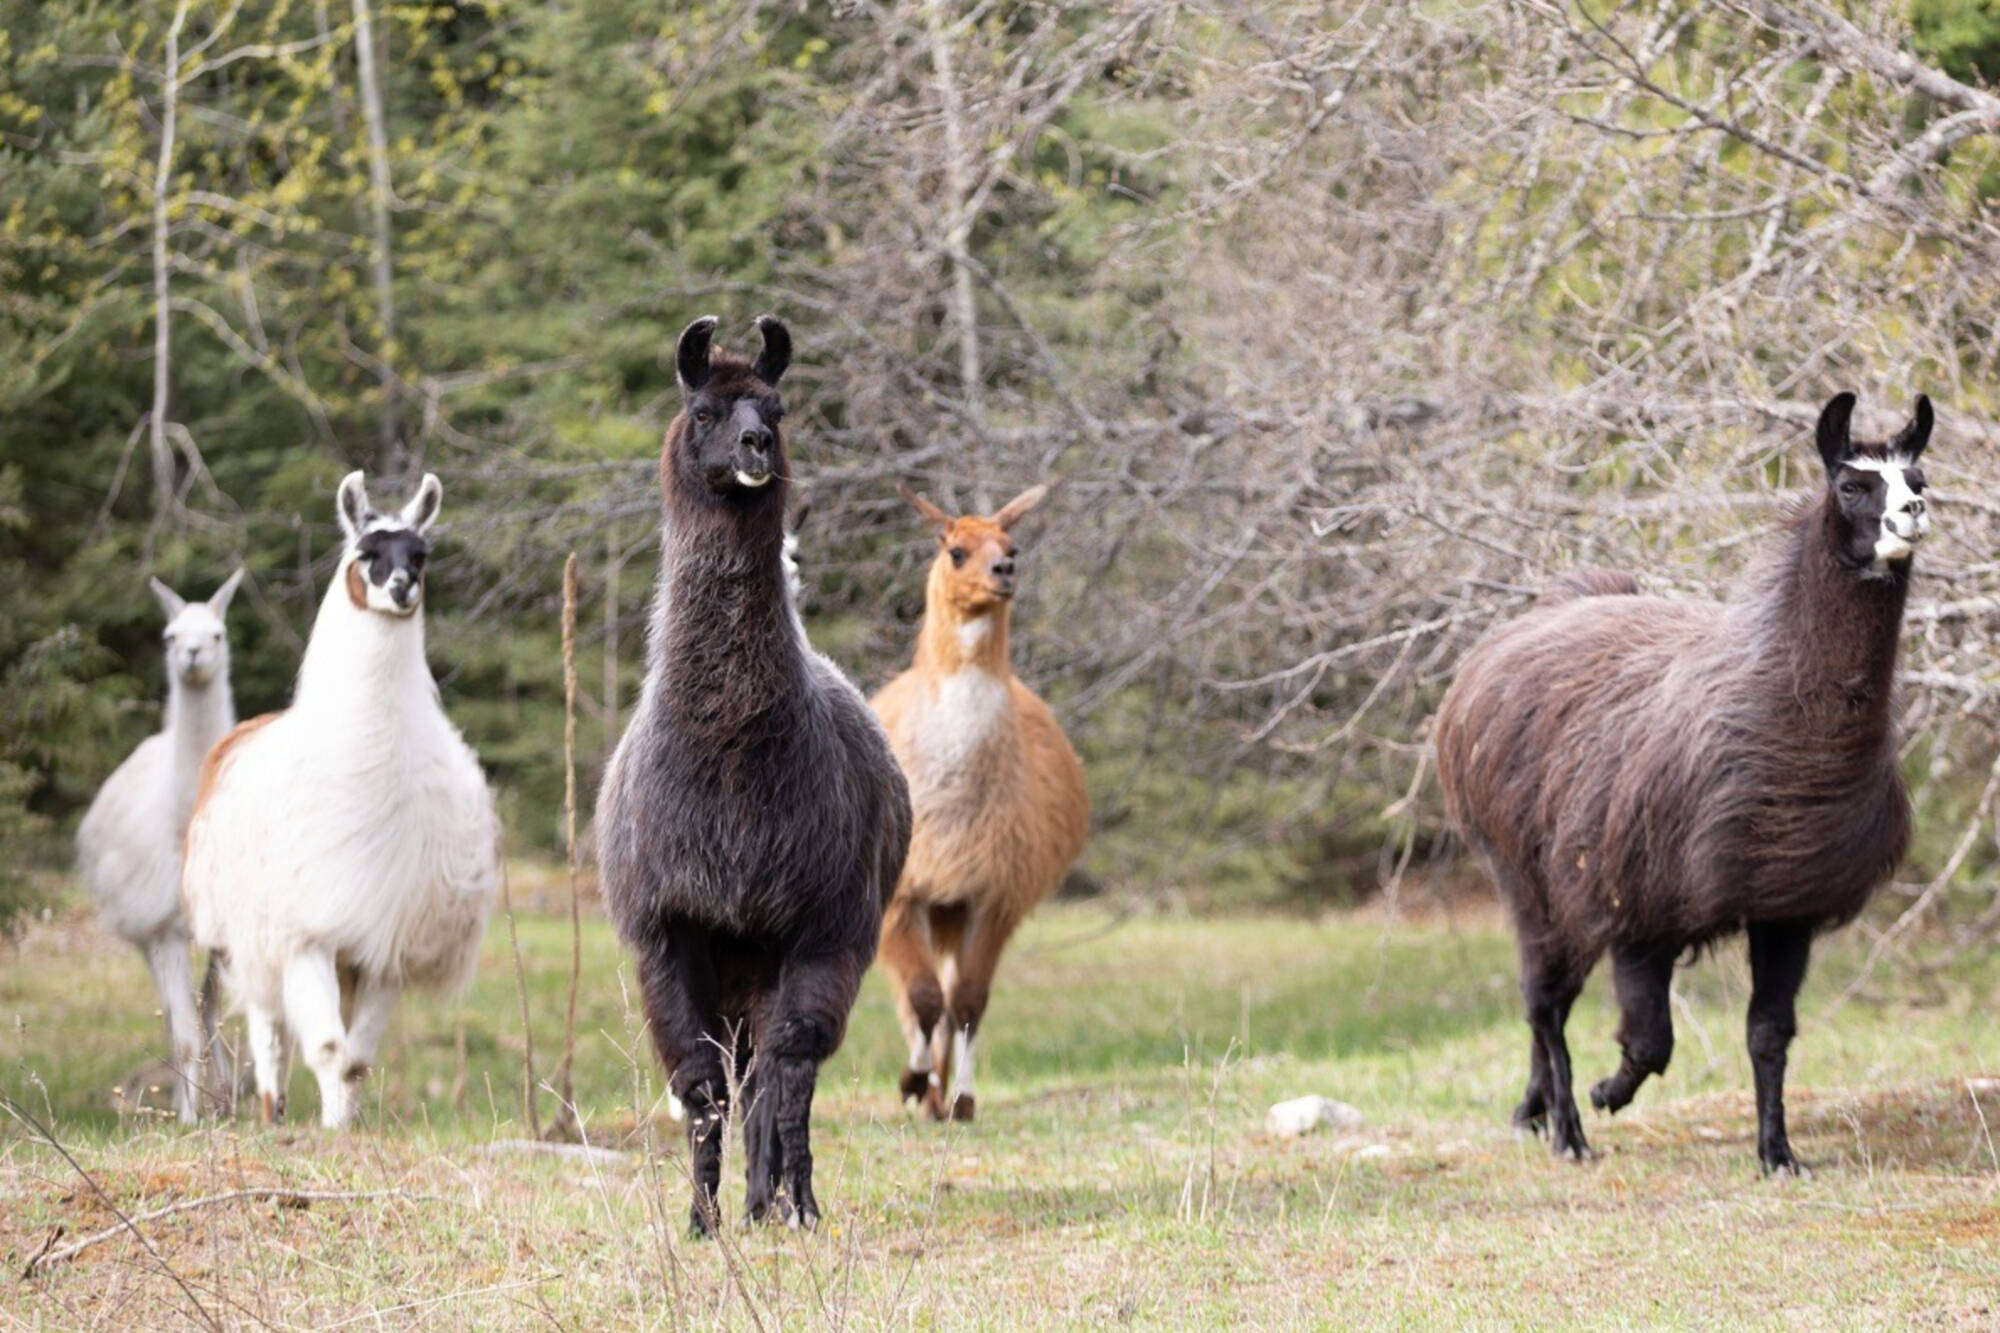 Llamas at the Llama Sanctuary have found a new home at the Recline Ridge EcoPark in Tappen. (Llama Sanctuary photo- Facebook)